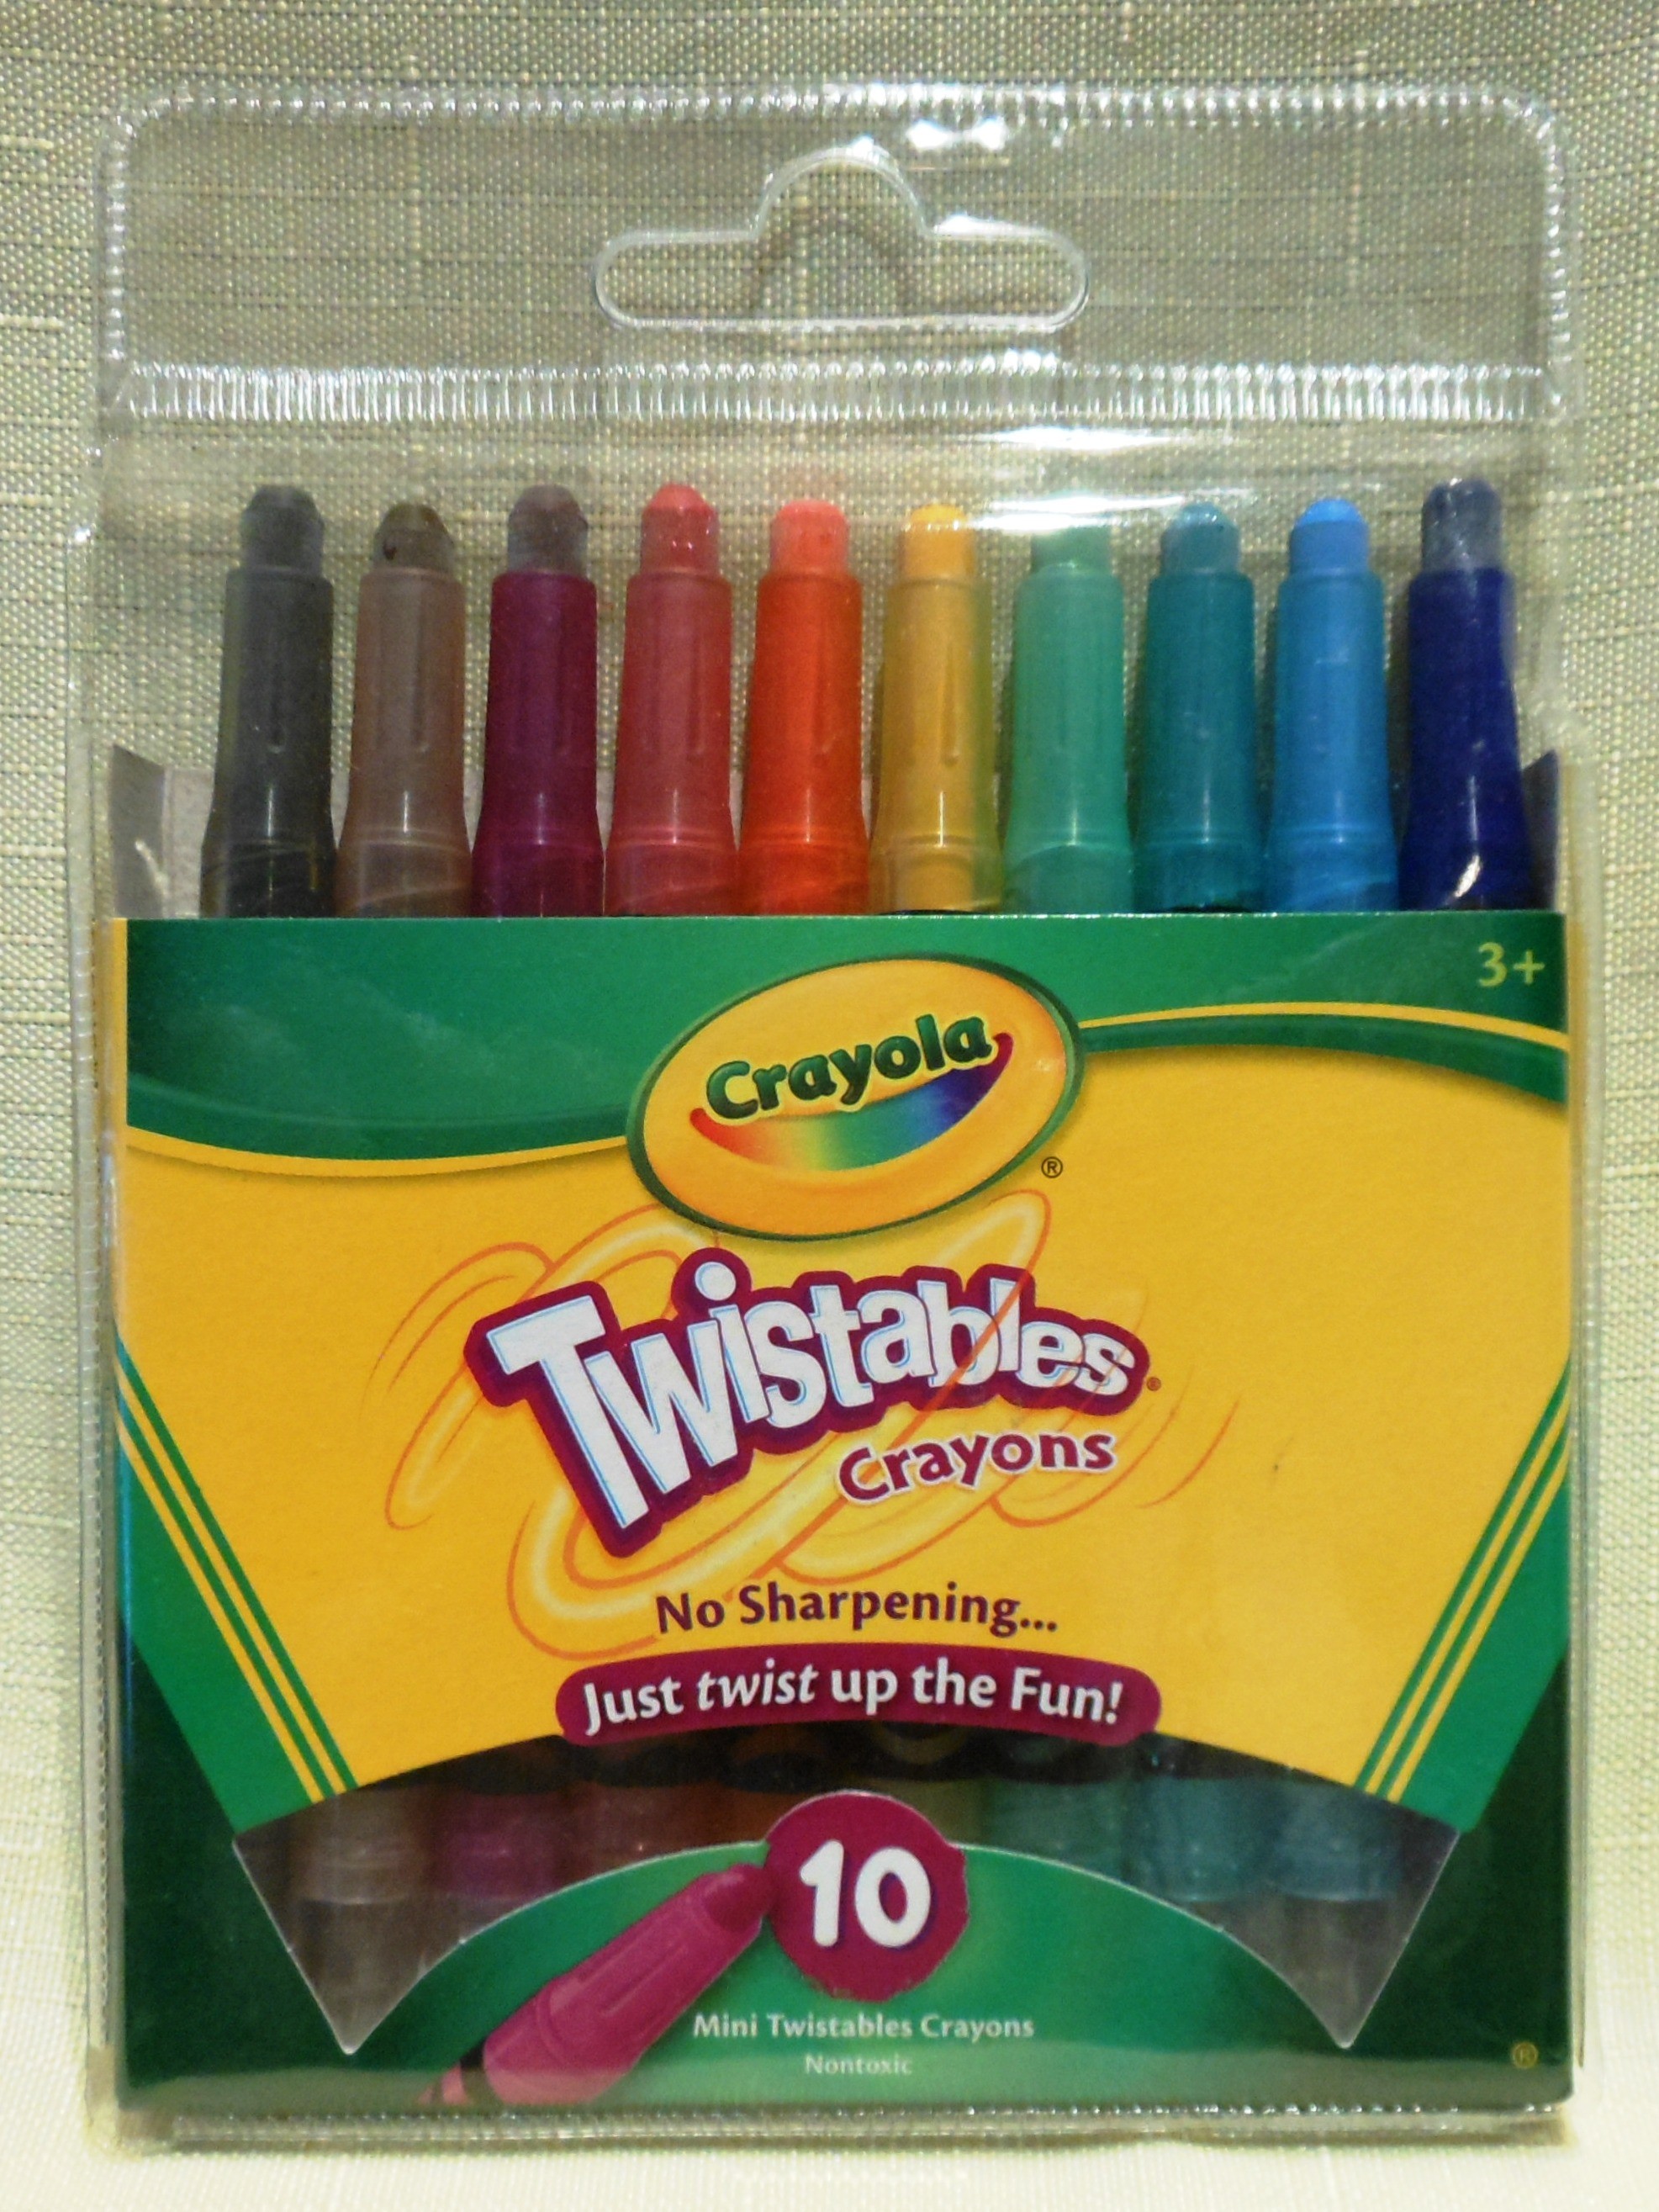 8 Count Crayola Twistable Crayons: What's Inside the Box